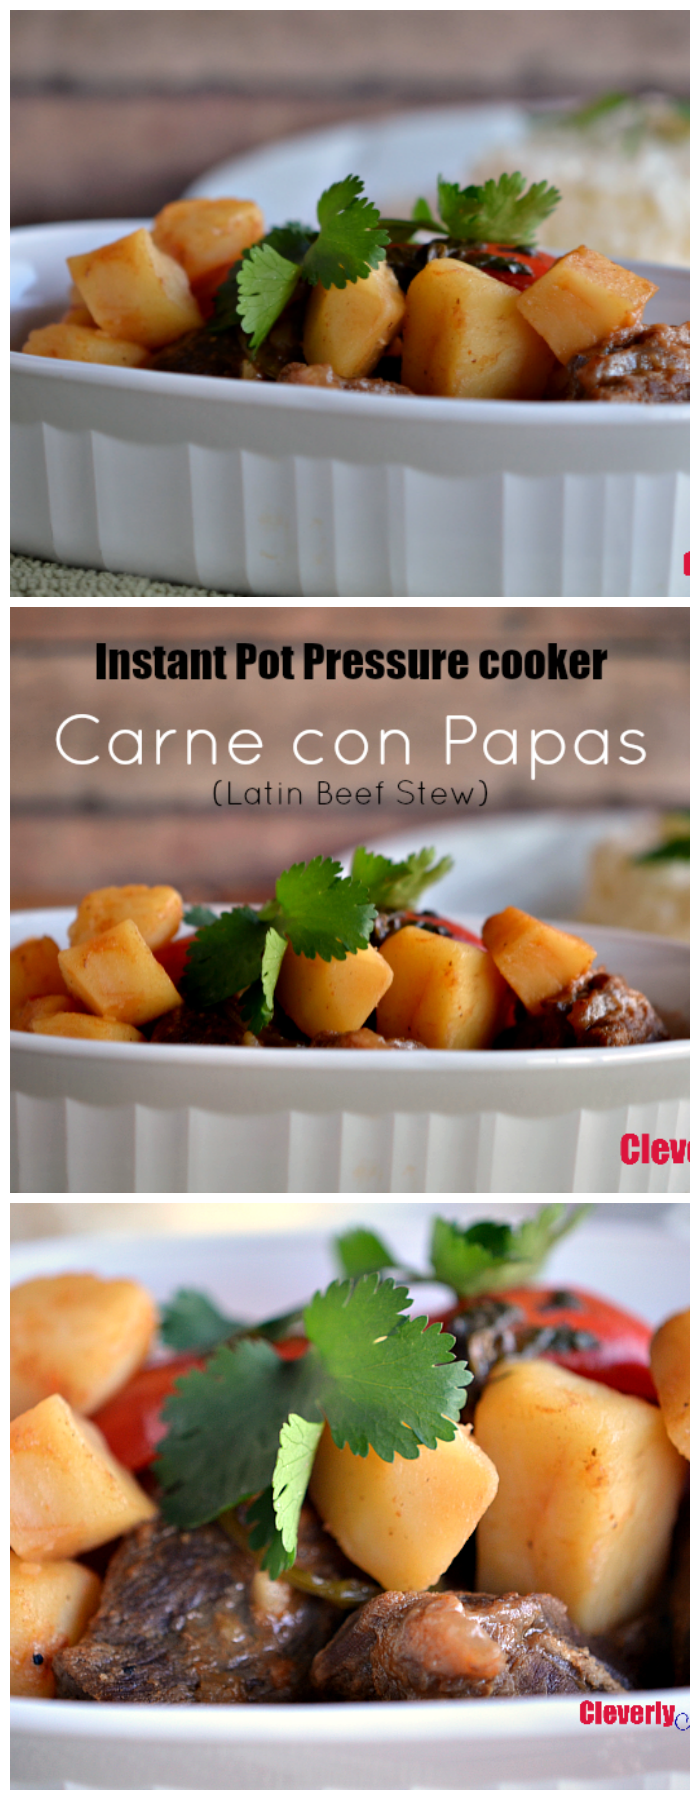 Enjoy this delicious and easy Instant Pot Carne con Papas (Latin Beef Stew) recipe. It is a must-have for meat and potatoes fans everywhere. Recipe at CleverlyMe.com